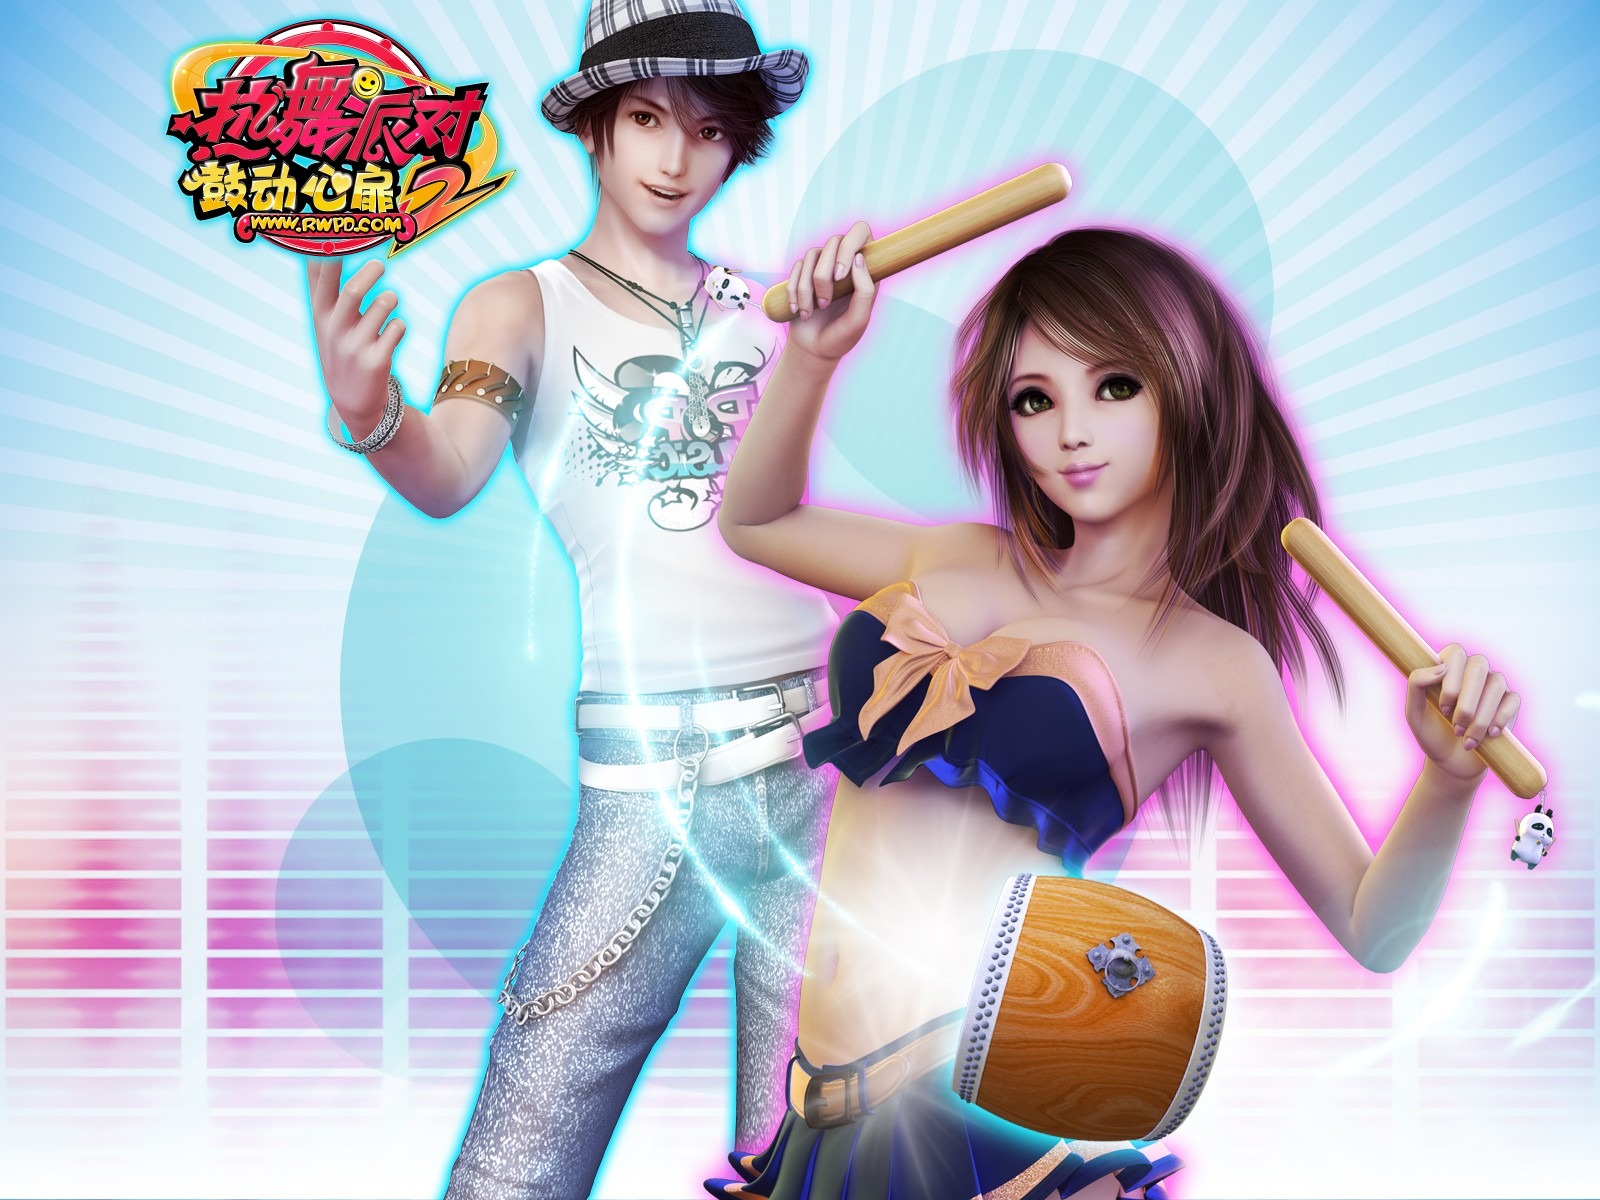 Online game Hot Dance Party II official wallpapers #14 - 1600x1200